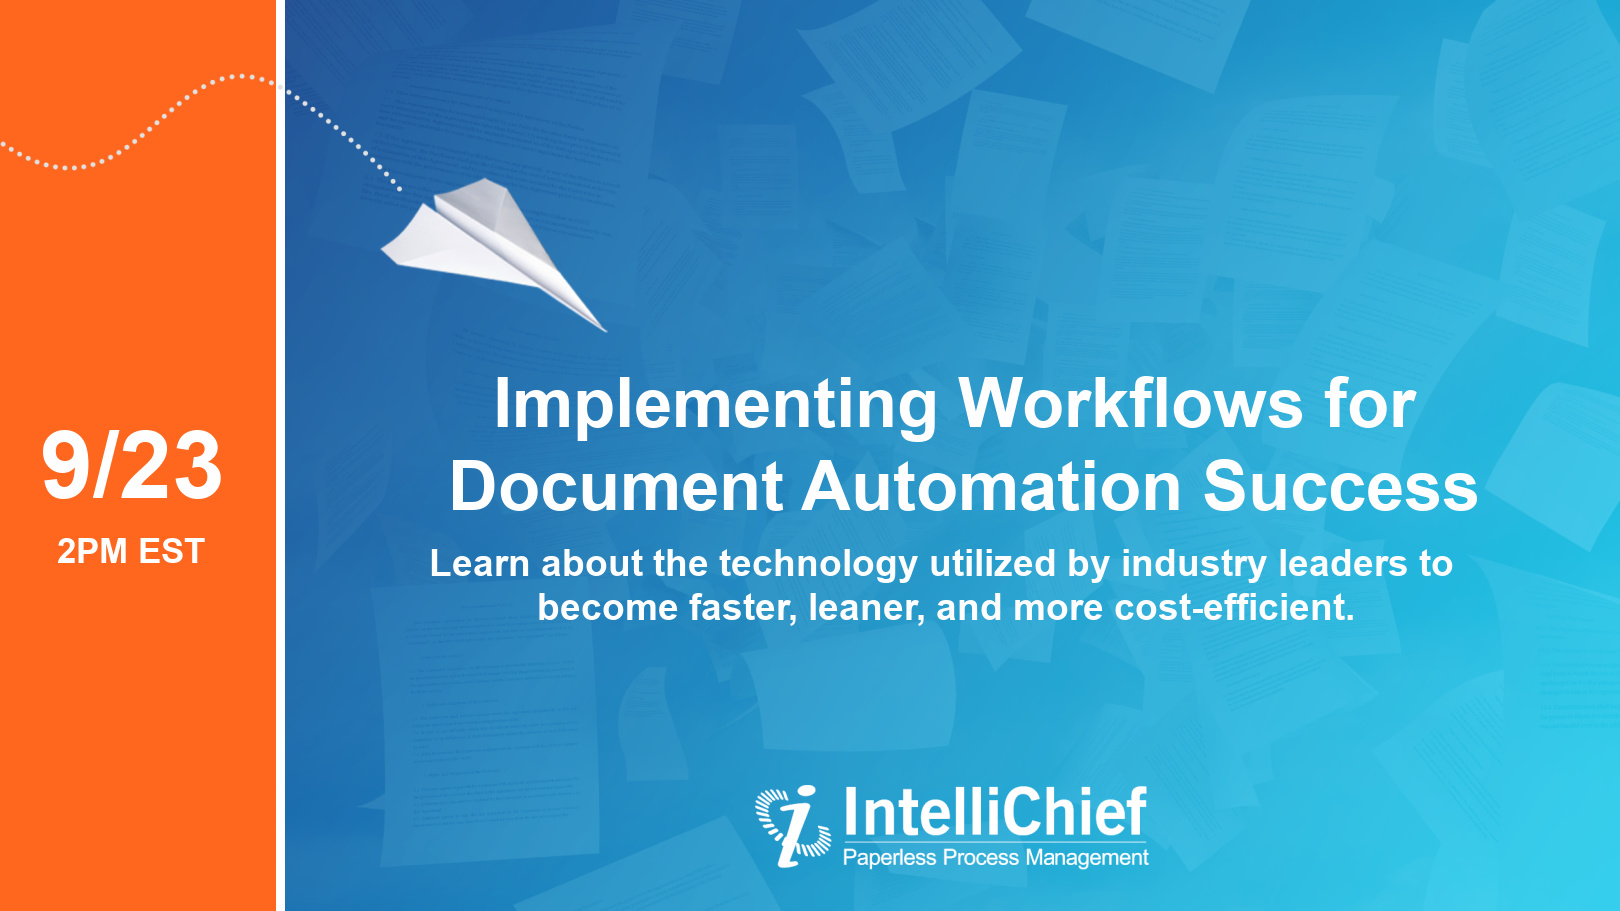 IntelliChief Digital Events Presents: "Implementing Workflows for Document Automation Success"